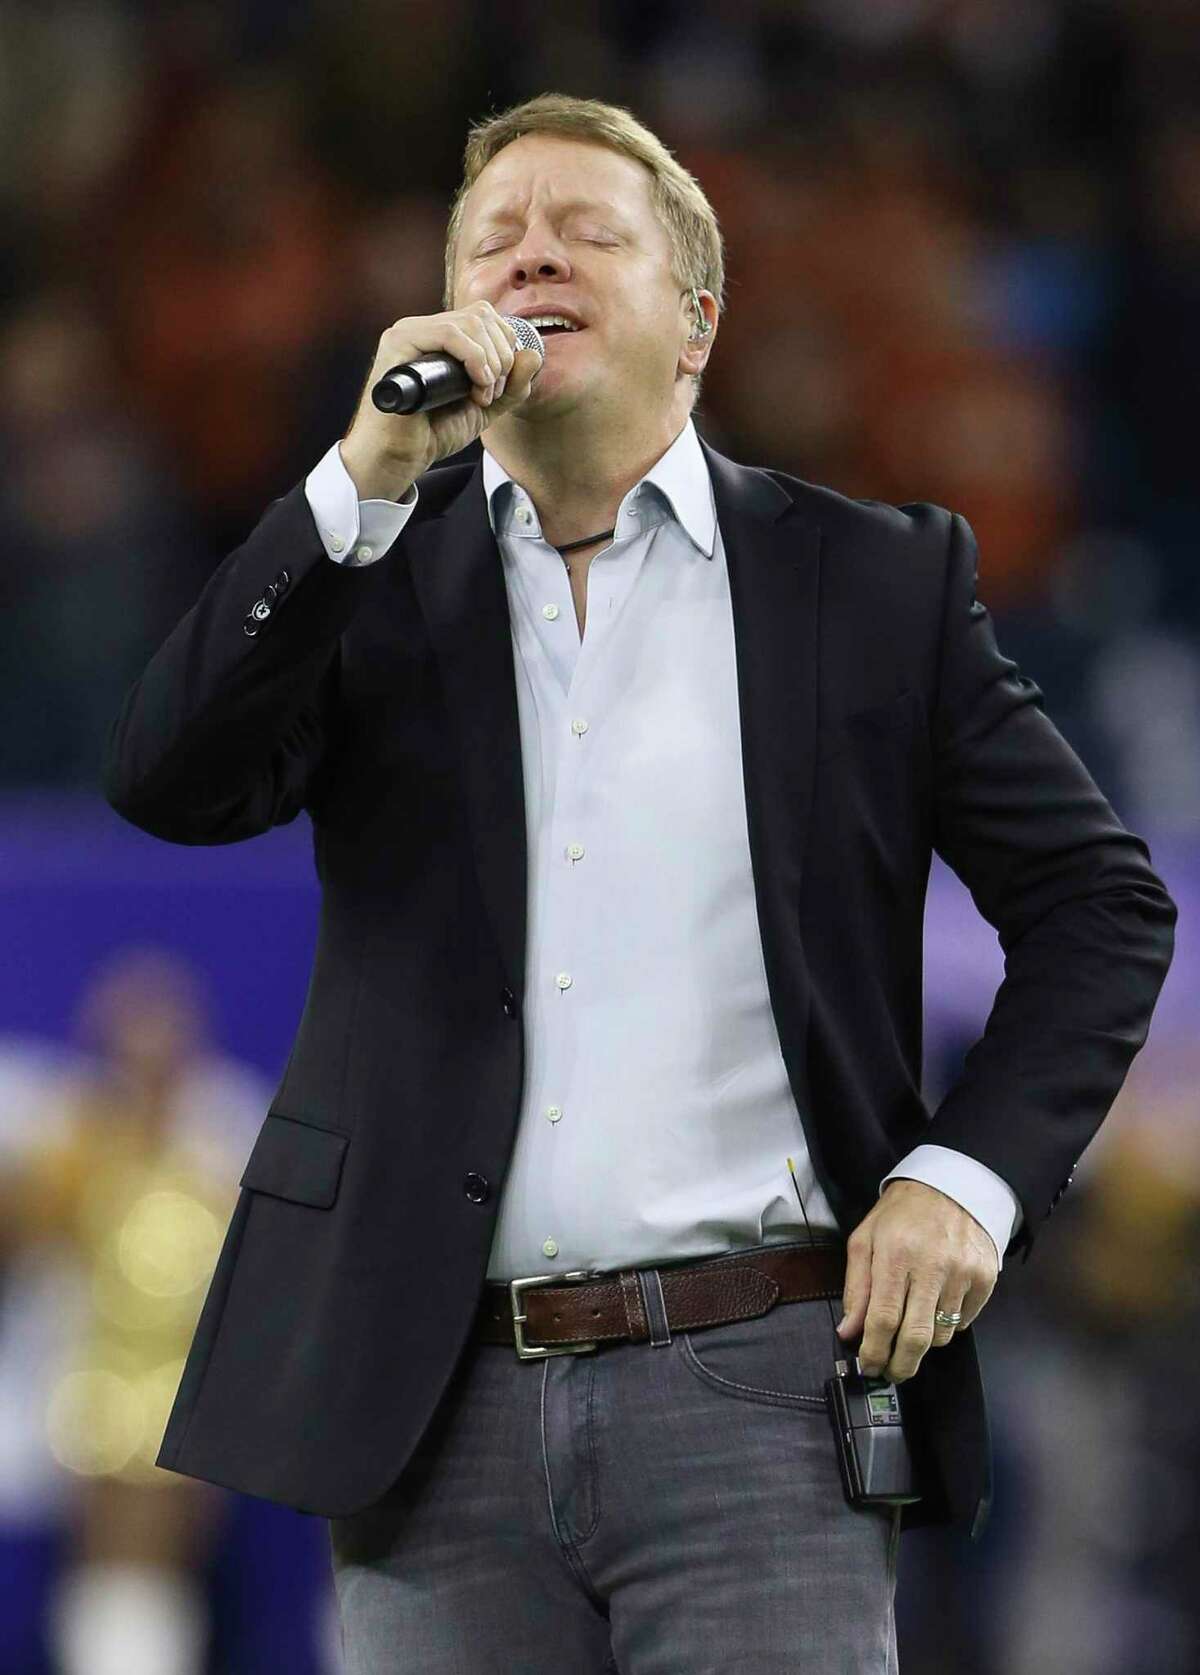 Cory Morrow performs National Anthem during the opening ceremony of the 2017 Academy Sports + Outdoors Texas Bowl game at NRG Stadium on Wednesday, Dec. 27, 2017, in Houston.